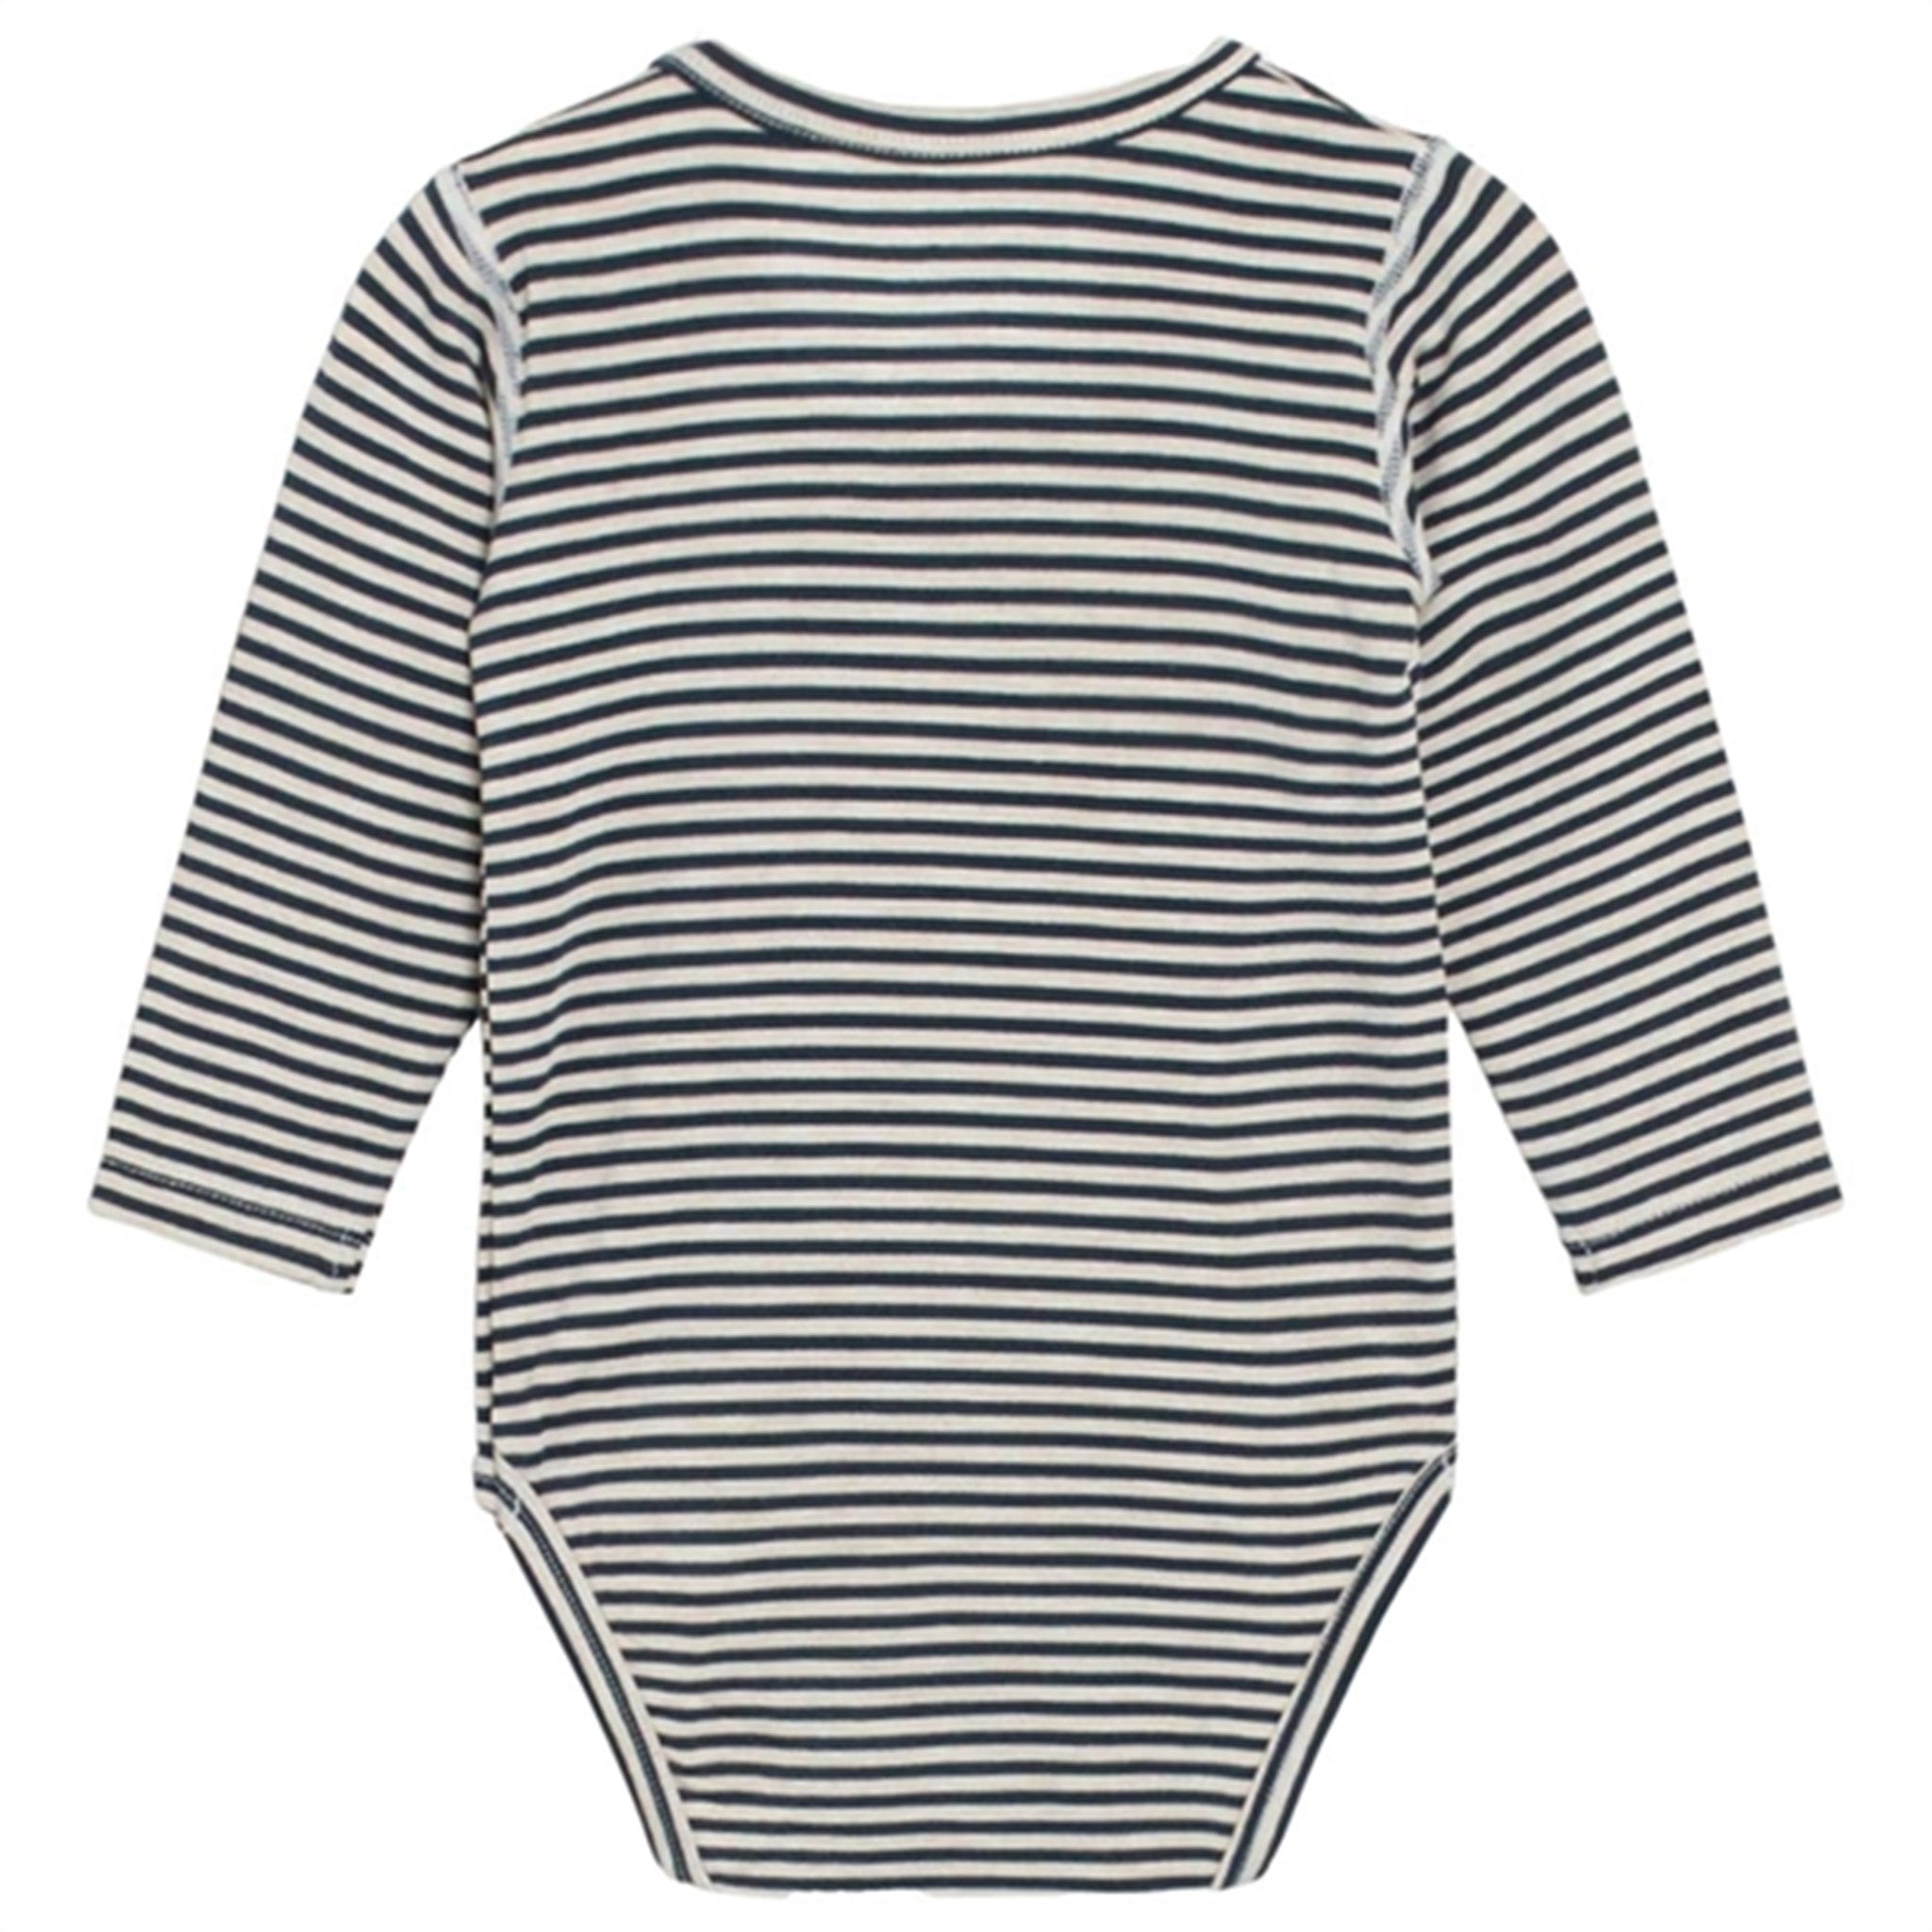 Hust & Claire Baby Stripes Blues Buller Body 2